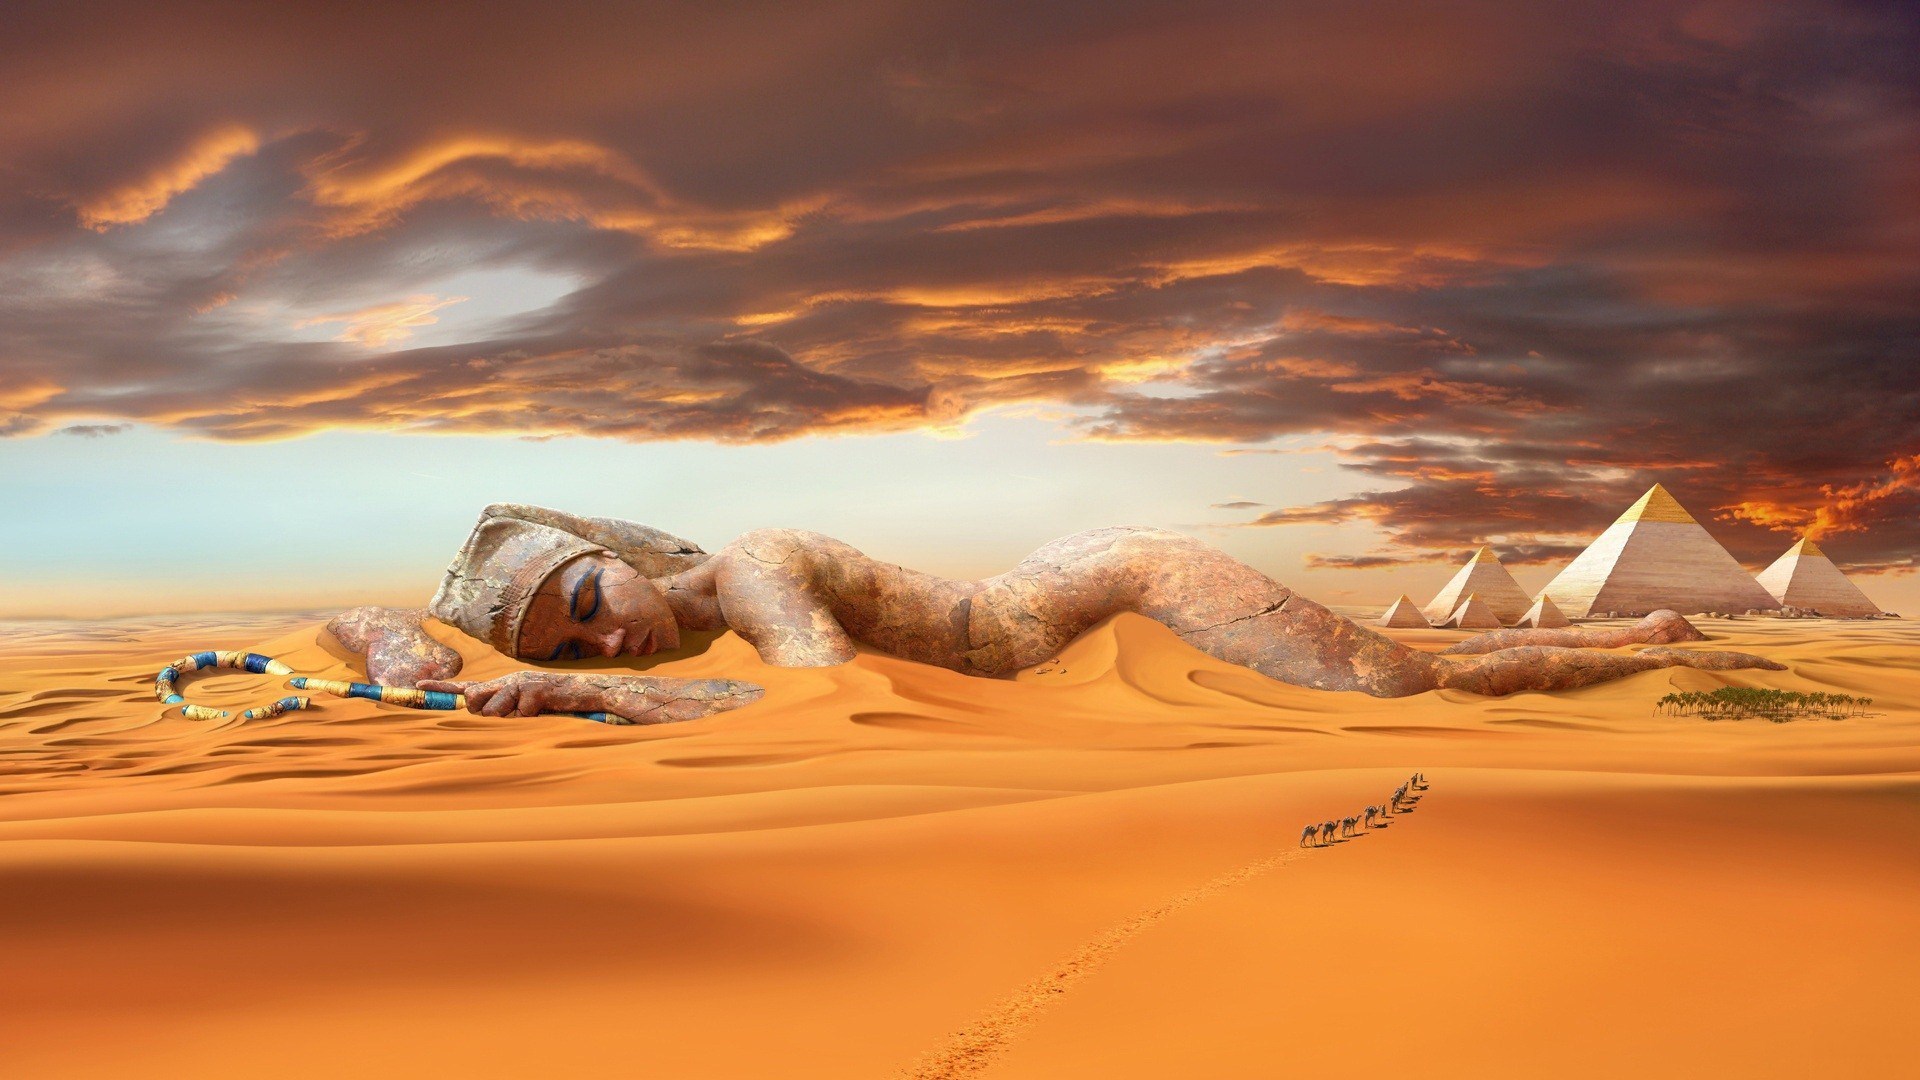 Egypt, Desert, Statue, Oasis Camels, Clouds, Woman, Bend Over | book ...